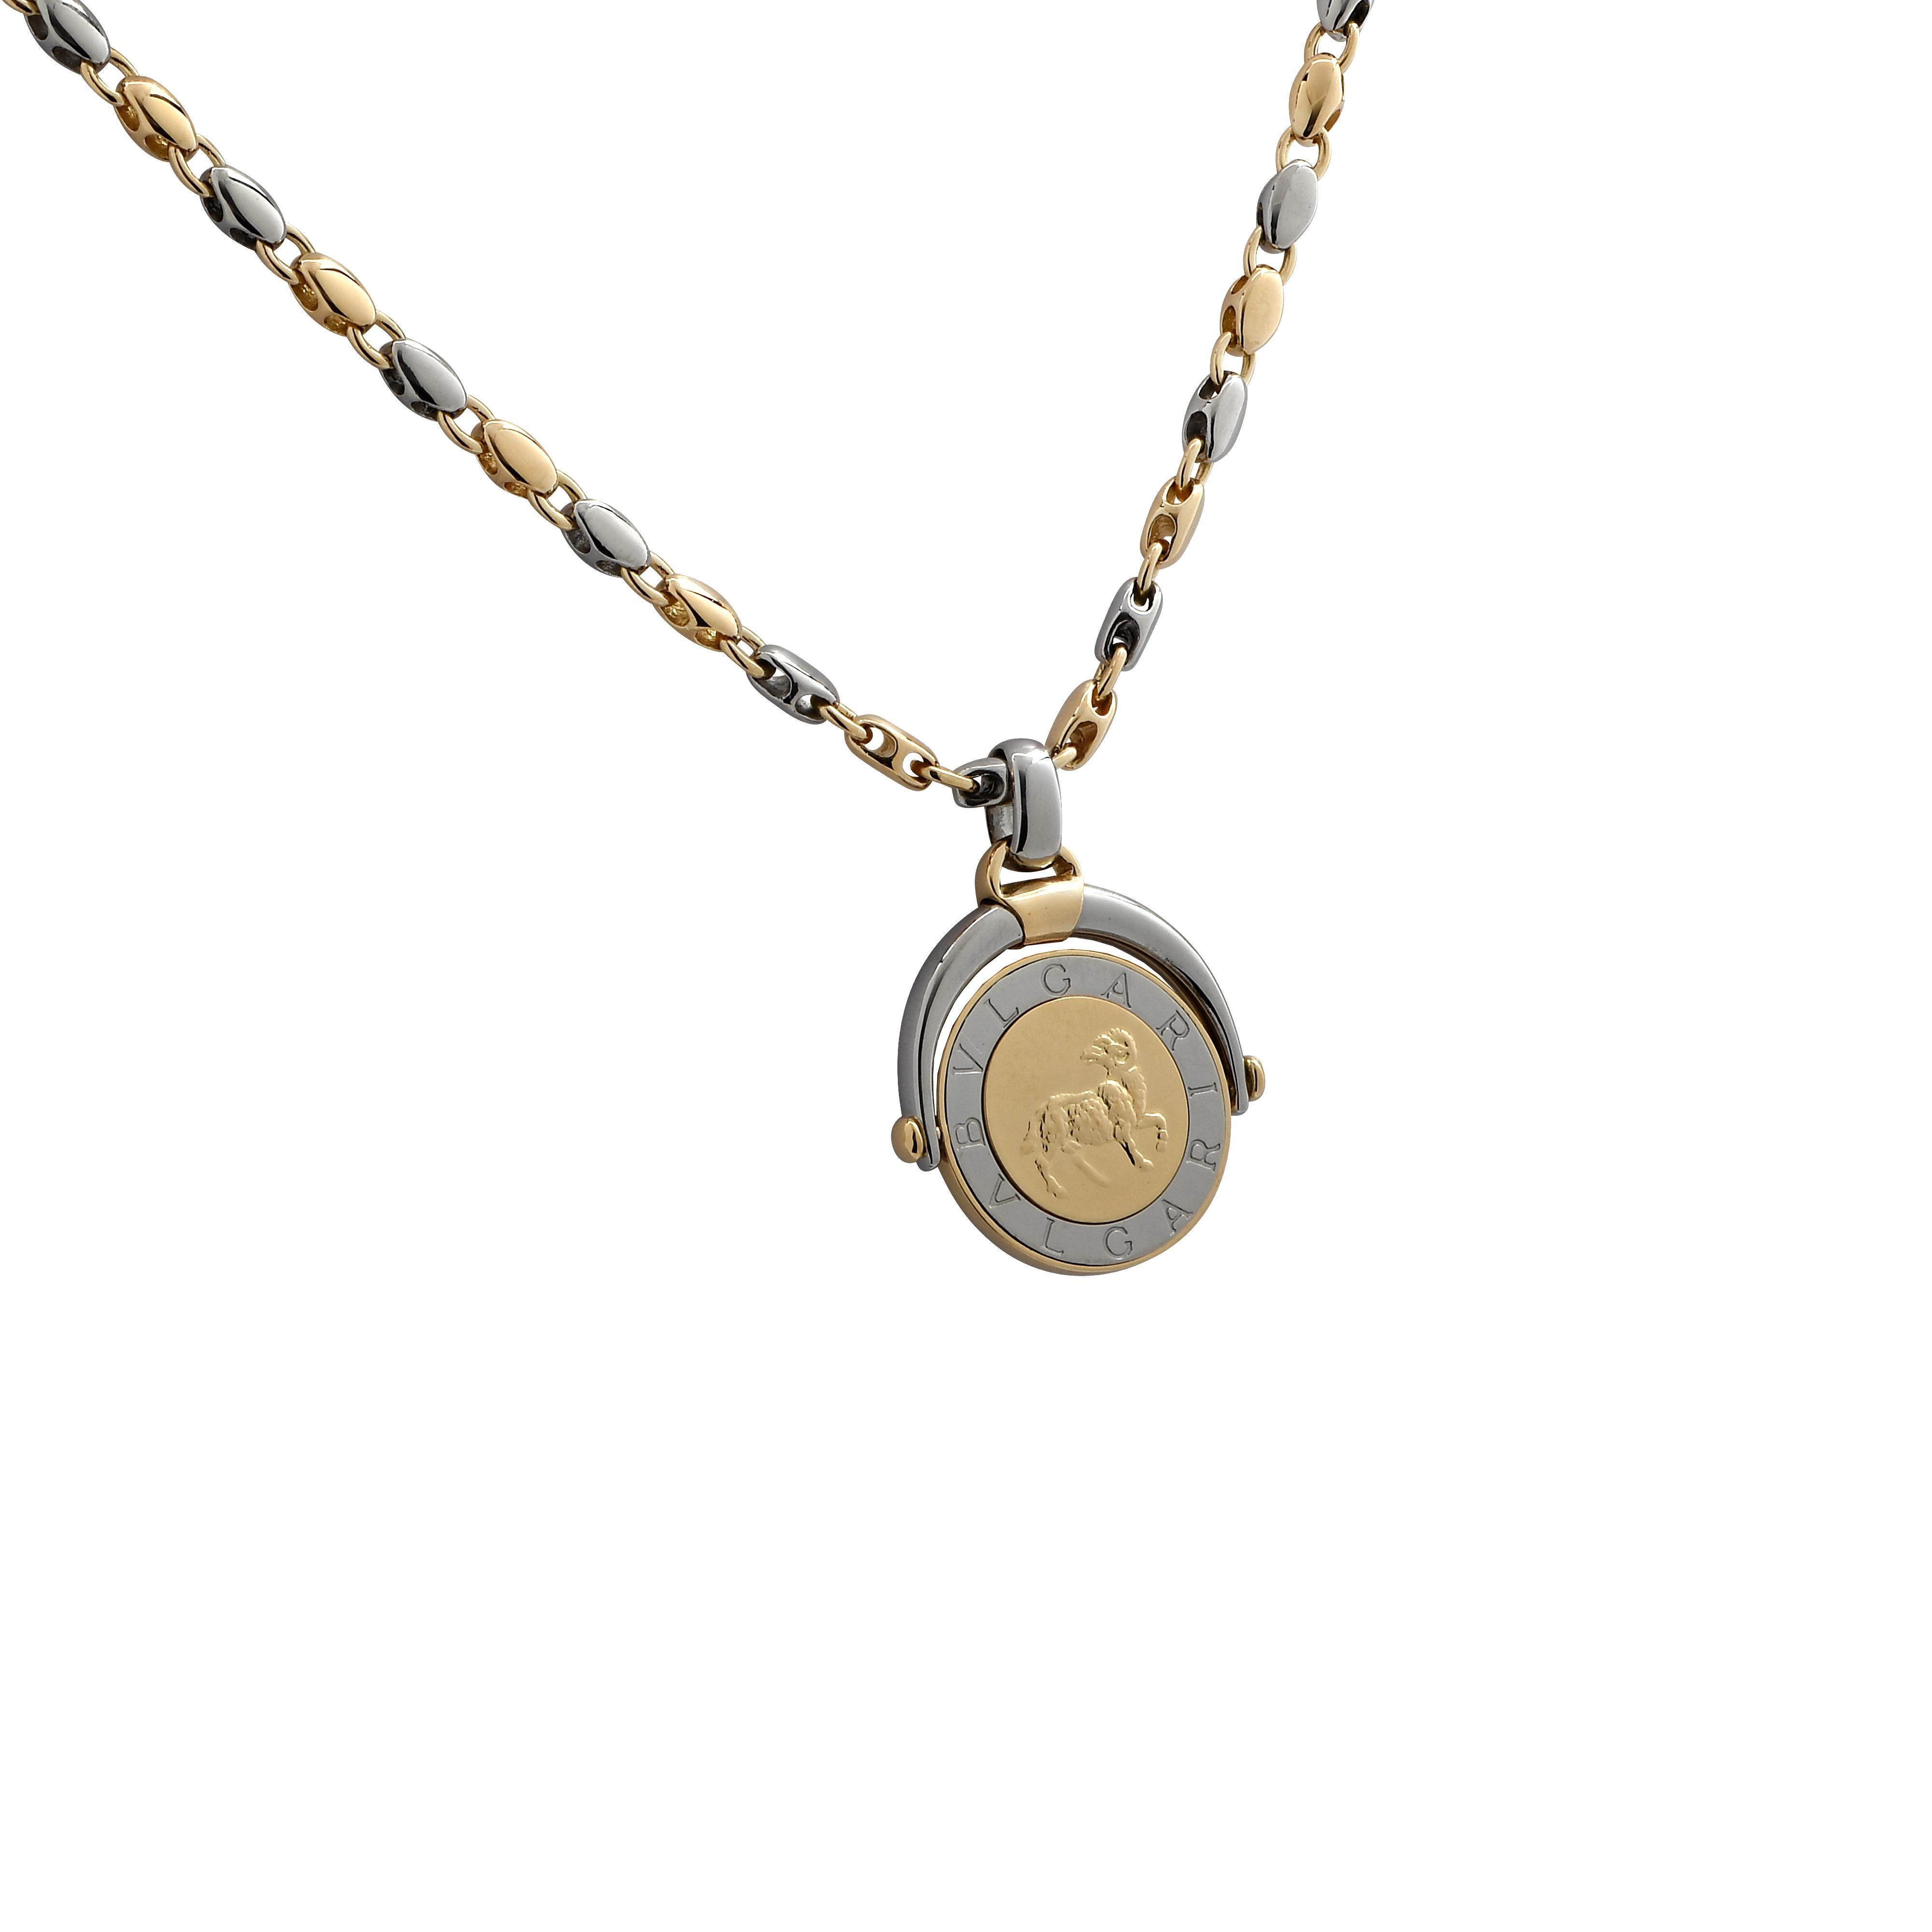 Stunning Bvlgari necklace crafted in 18 karat yellow and white gold. Yellow gold and white gold links alternate to form a chain measuring 34 inches in length and 3.8 mm in width. A zodiac Aries medallion pendant crafted in yellow and white gold and